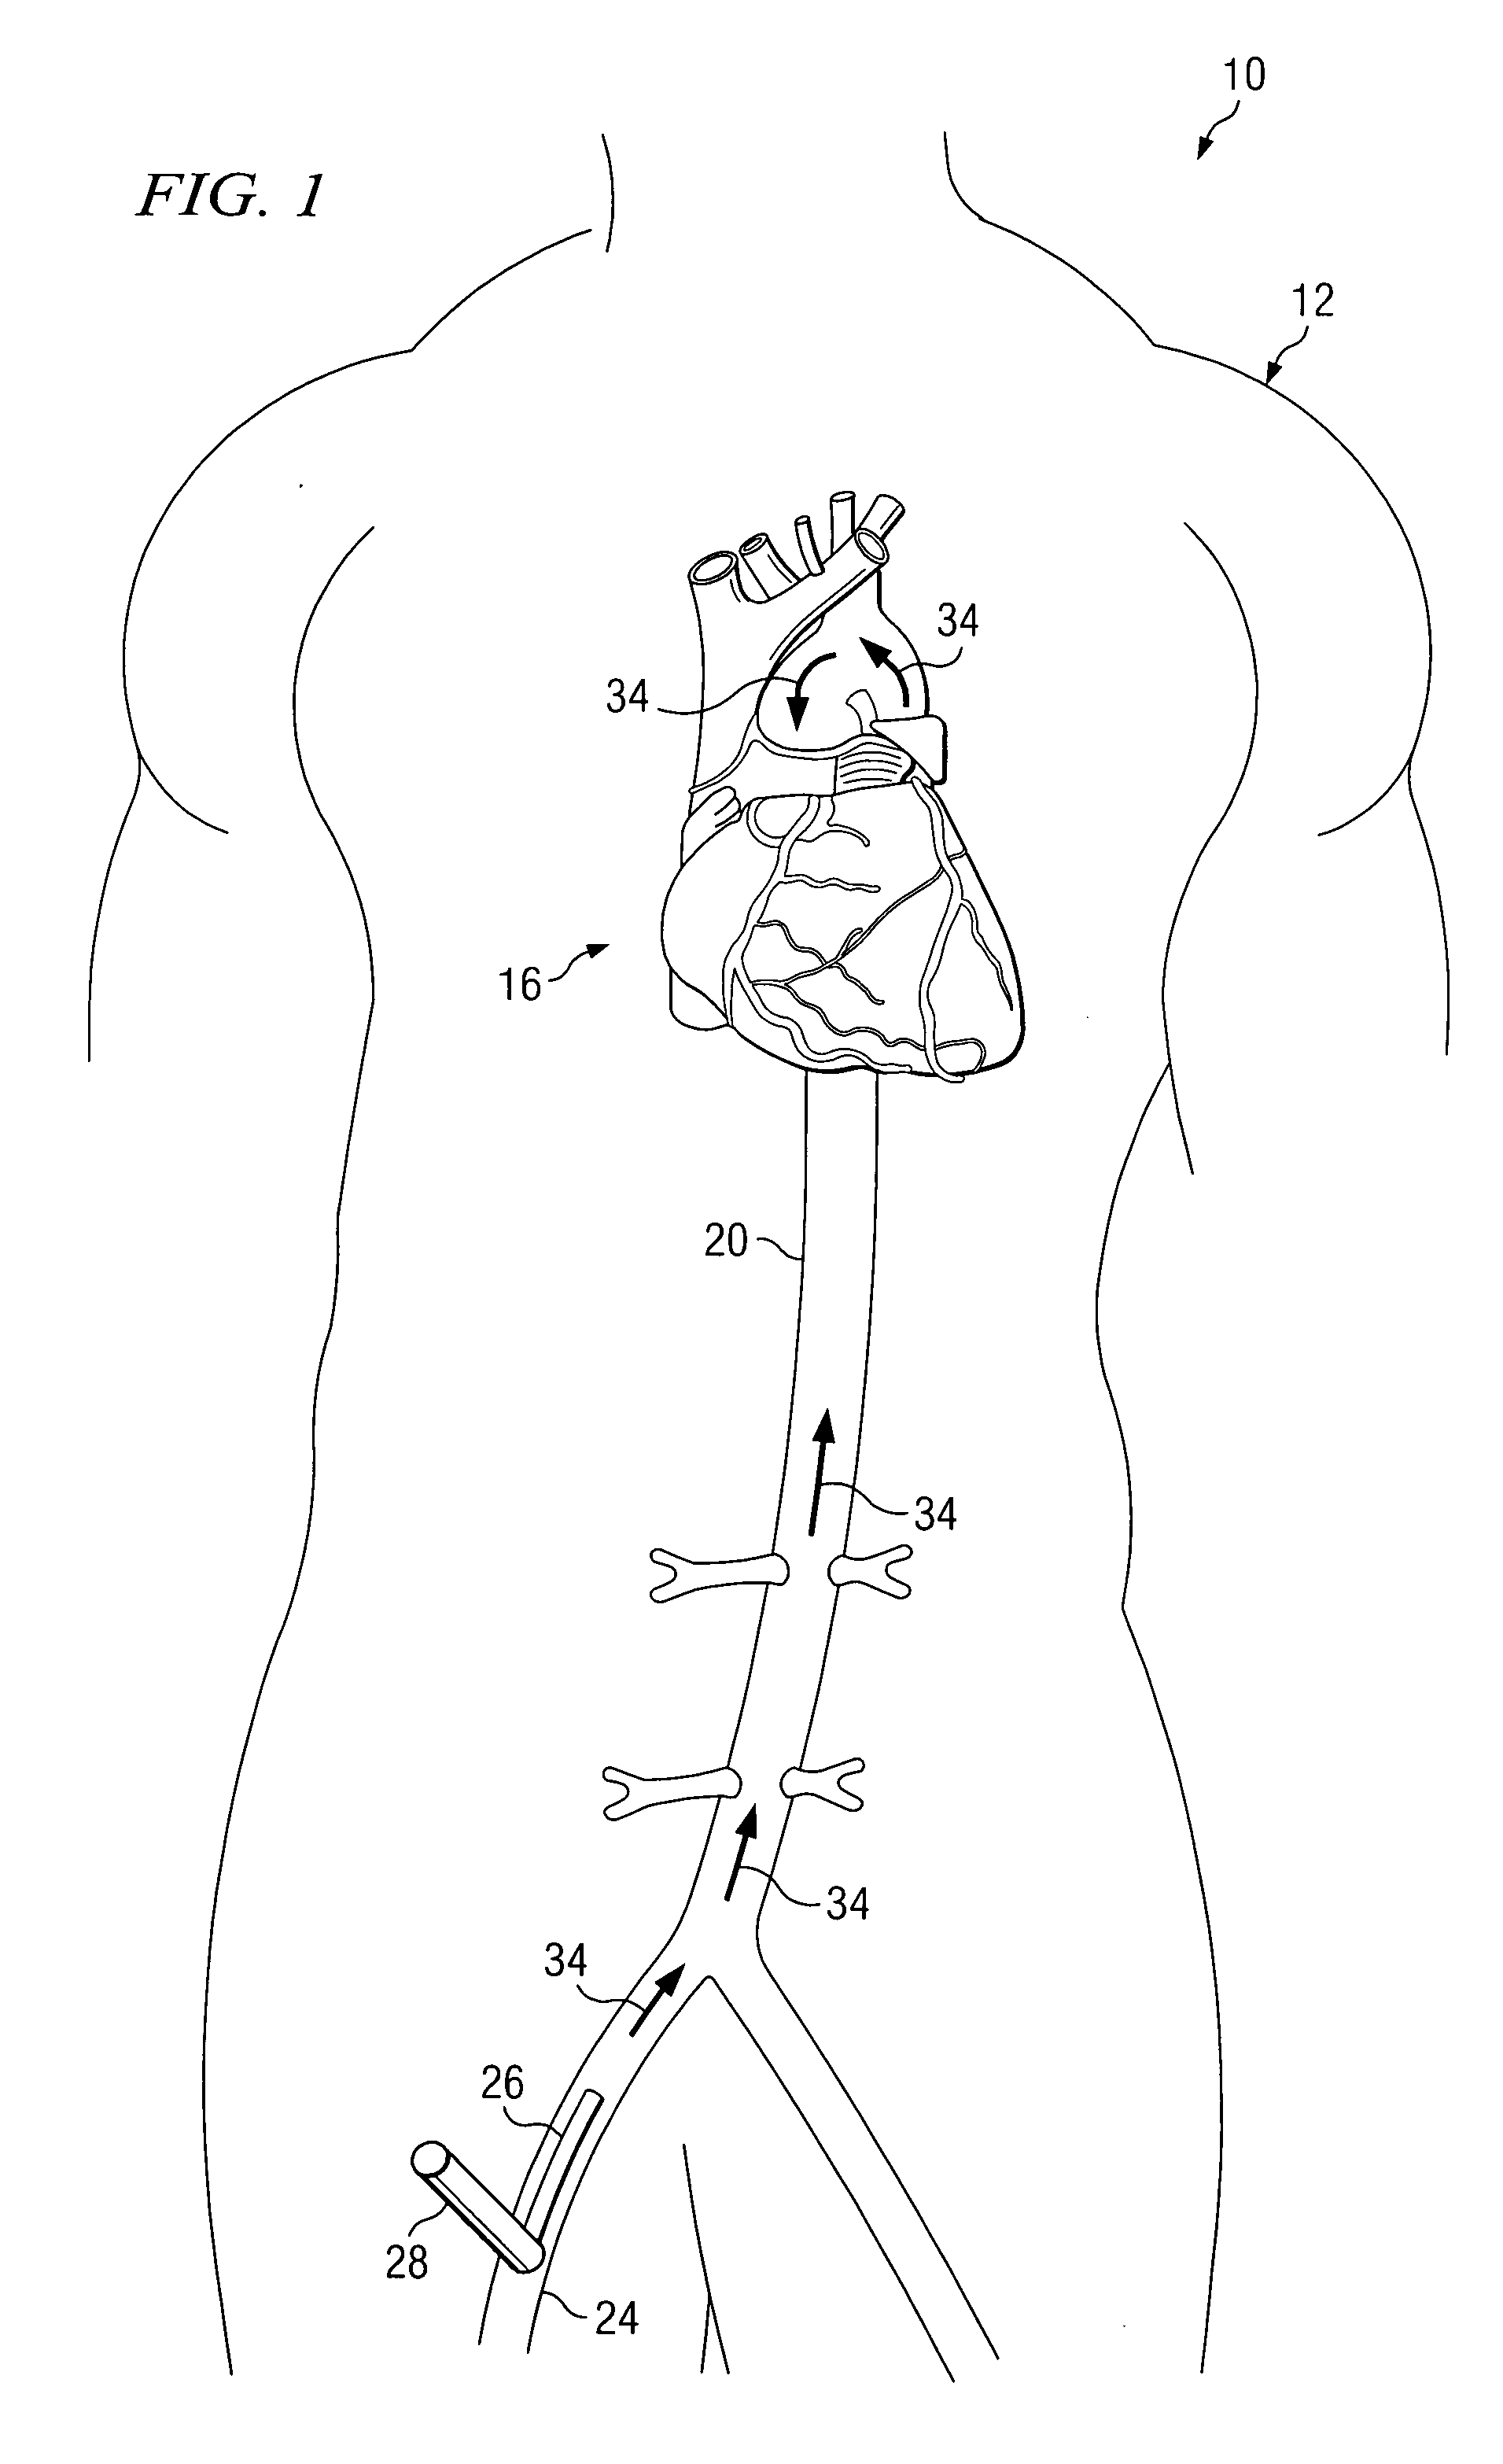 System and method for providing embolic protection